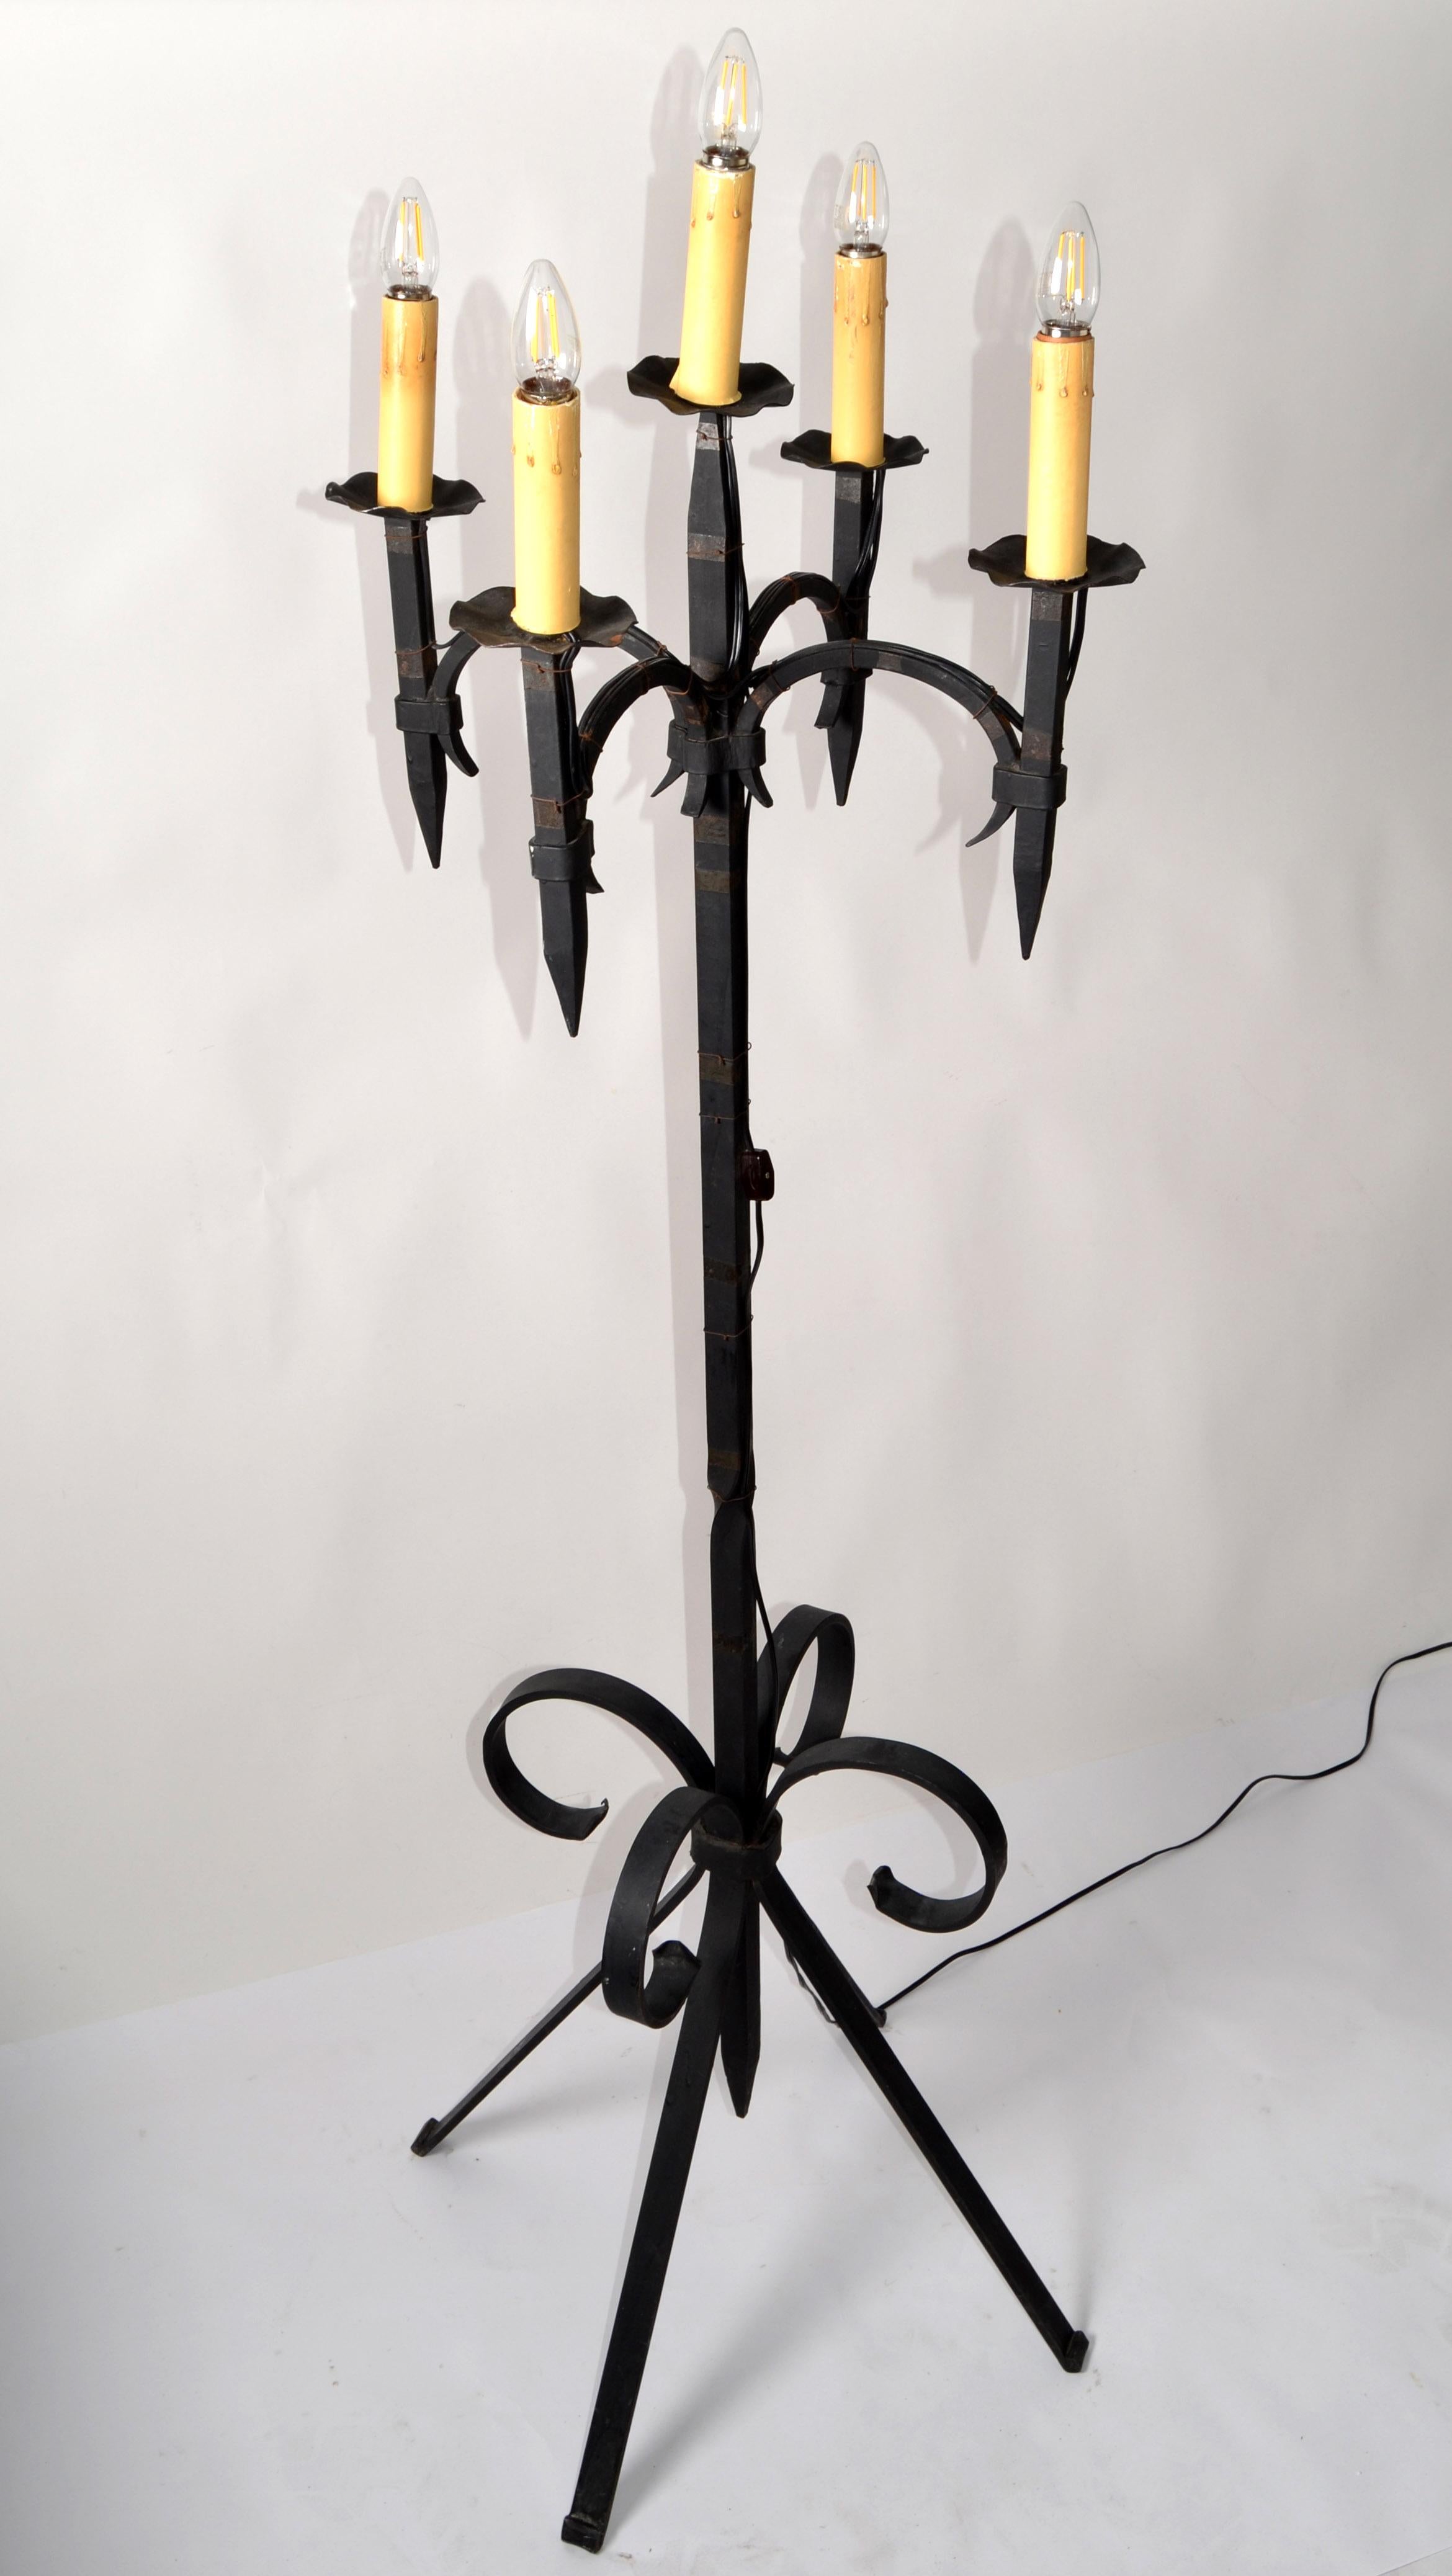 Early 20th Century French Forged Wrought Iron 5 Light Candelabra Floor Lamp For Sale 11